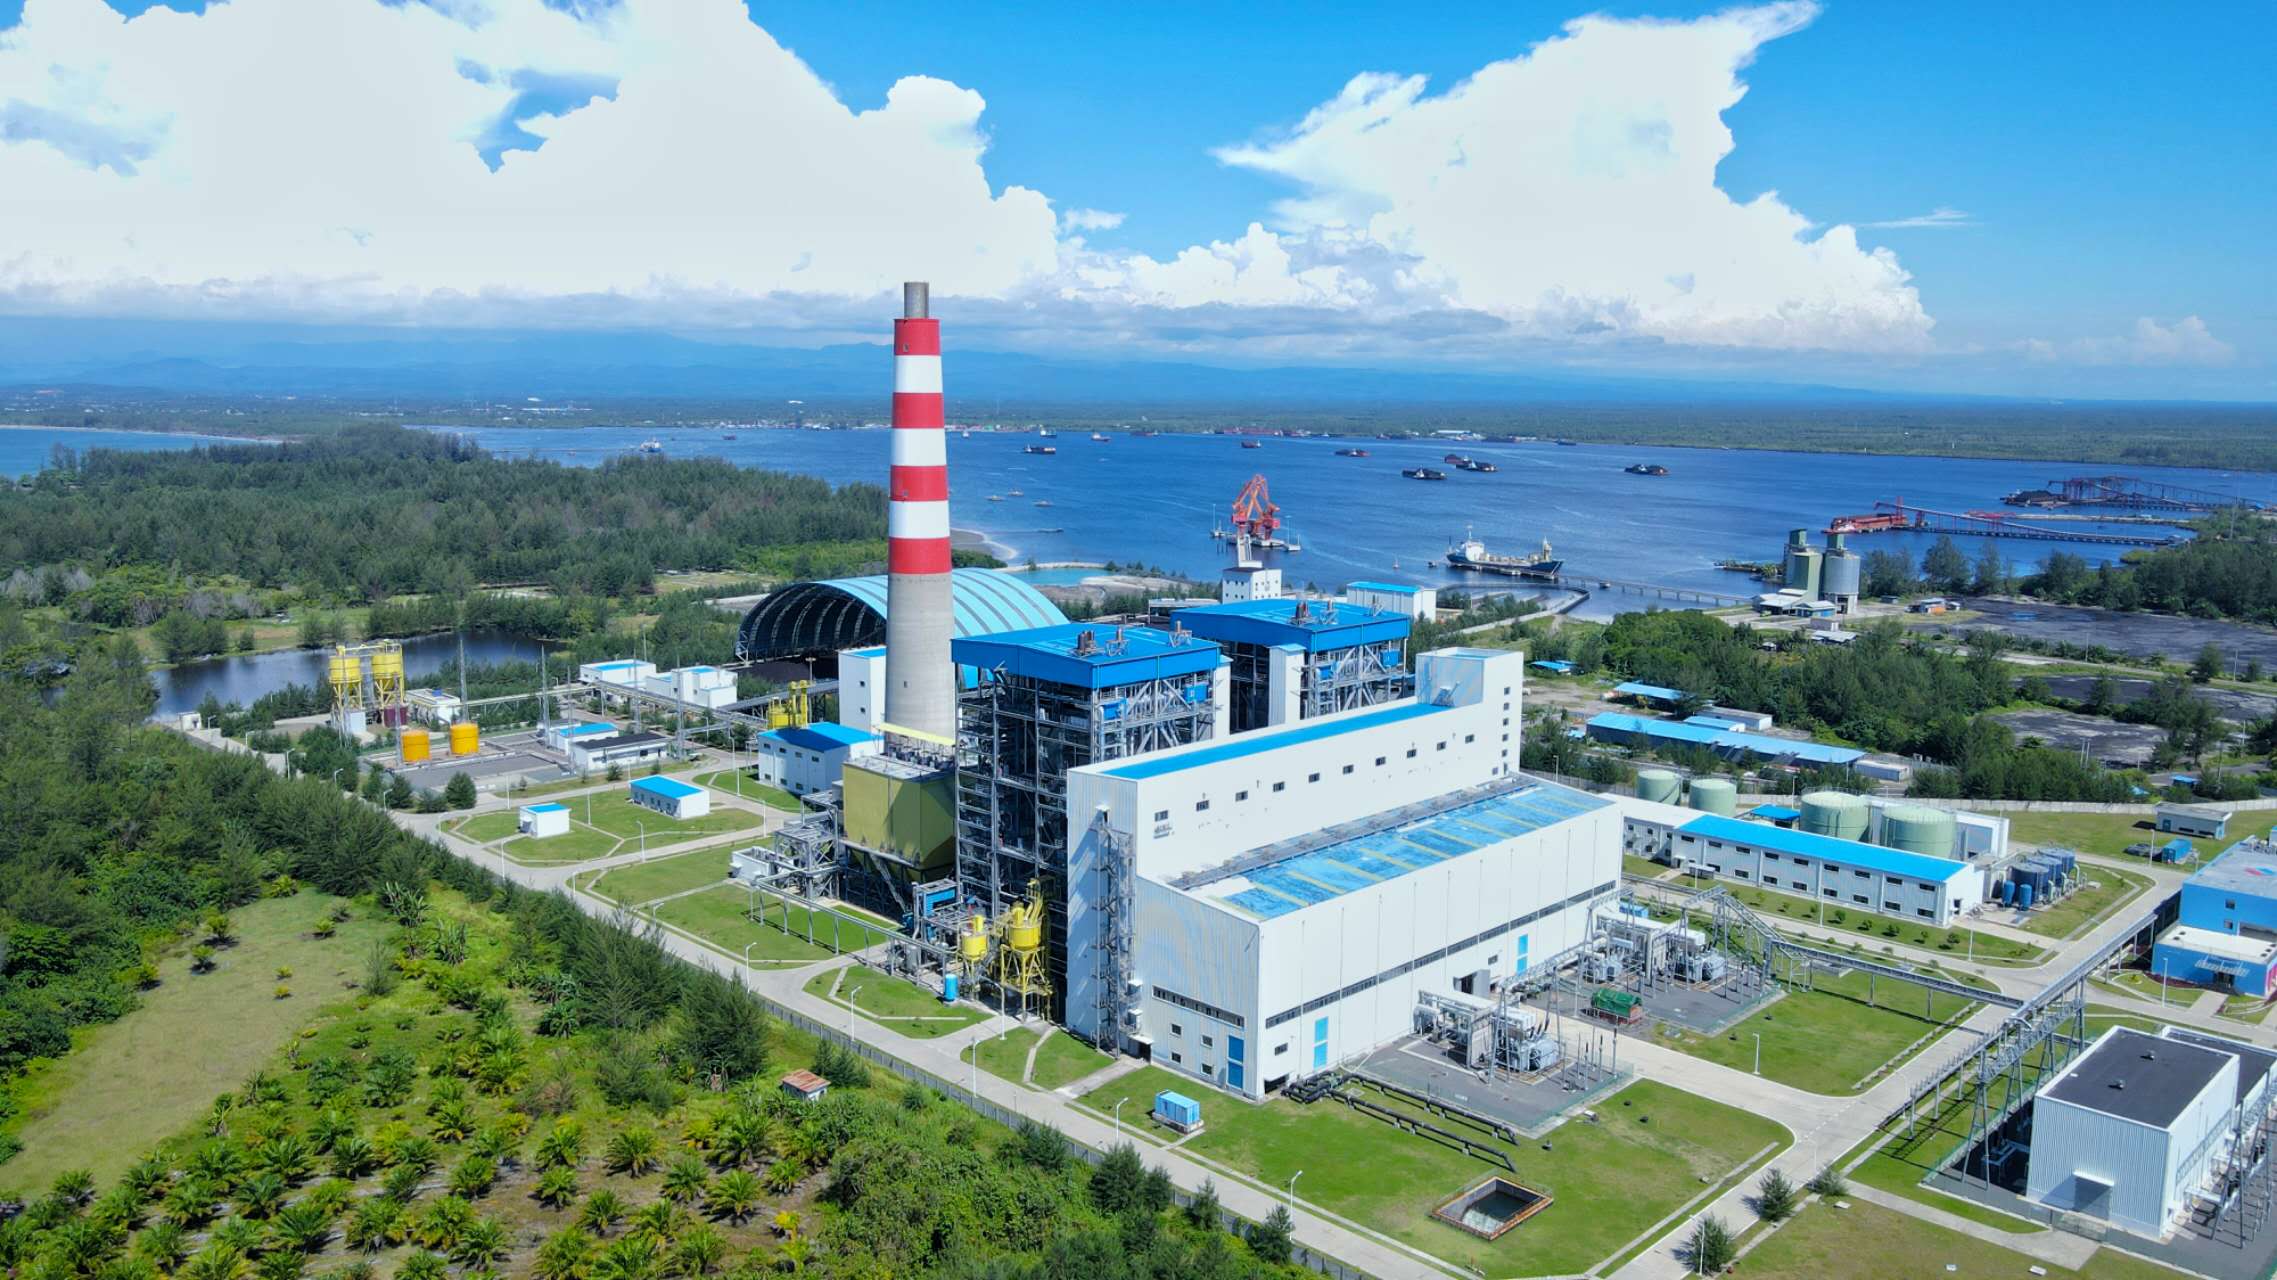 Bengkulu power plant generated more than 1 billion KWH of electricity annually